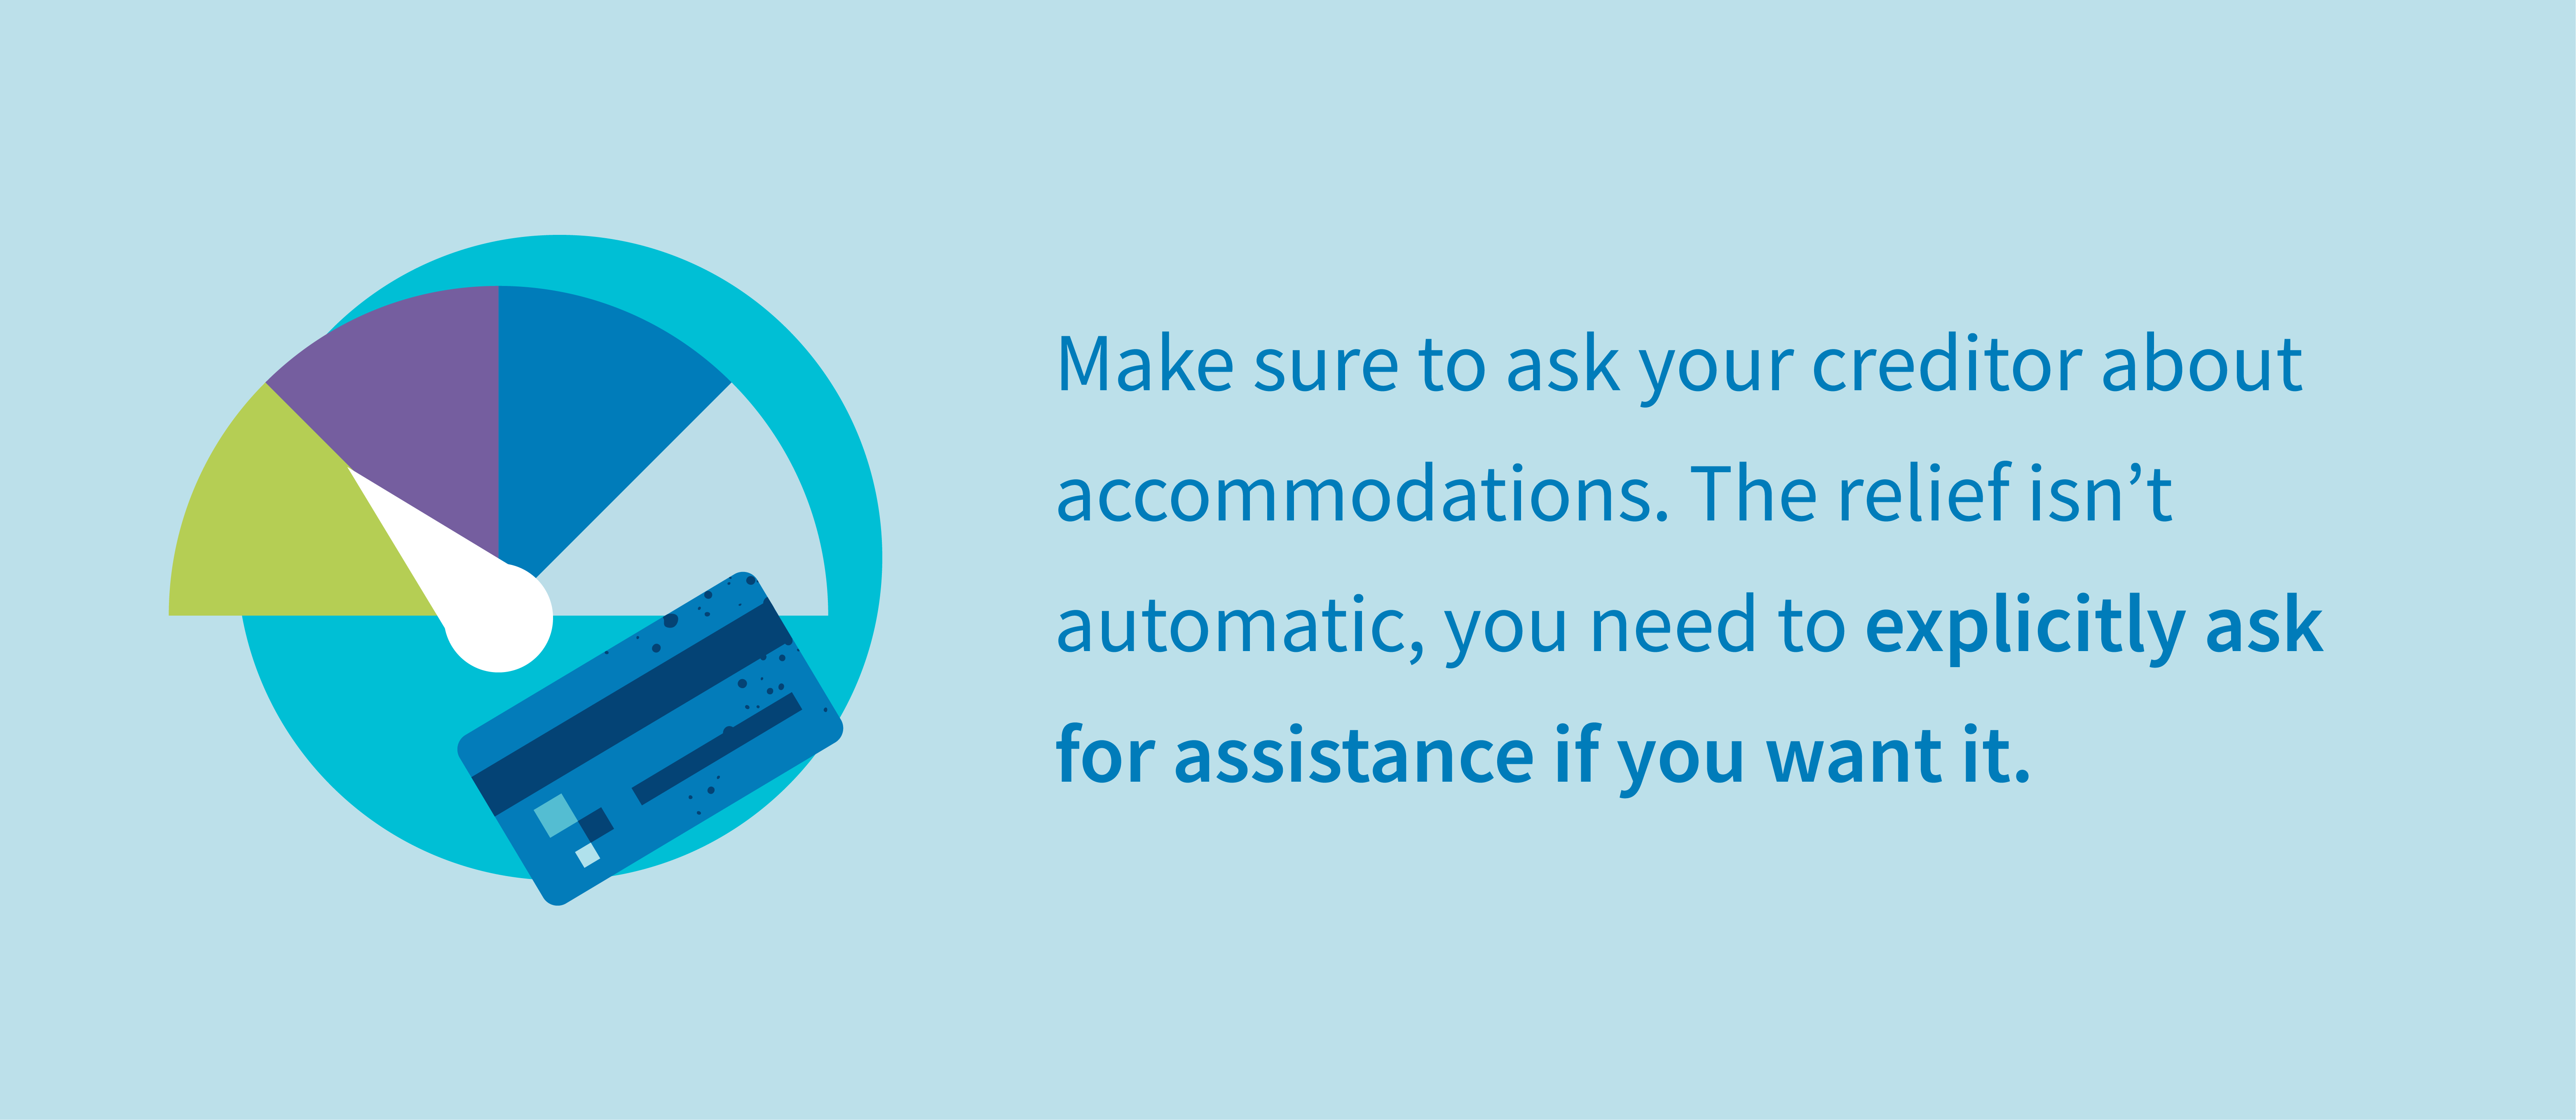 Make sure to ask your creditor about accommodations. The relief isn't automatic, you need to explicitly ask for assistance if you want it.